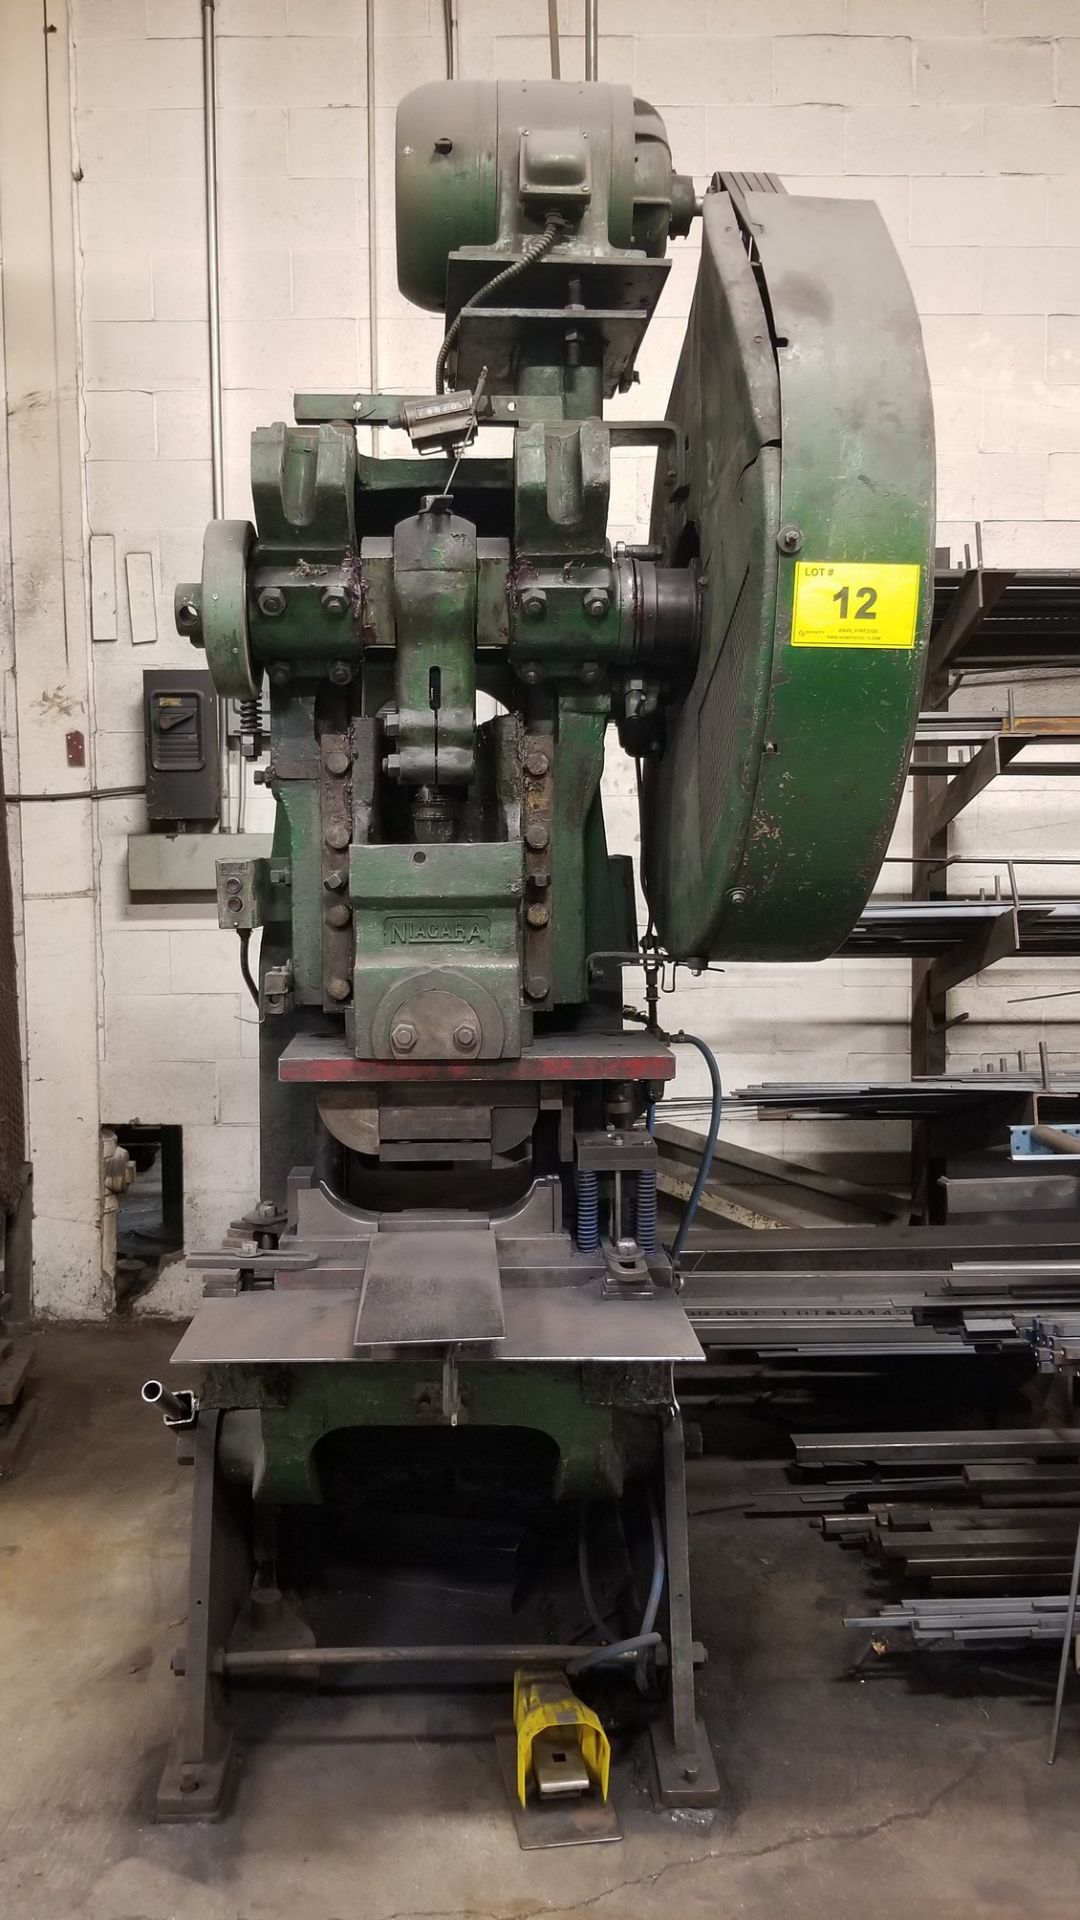 NIAGARA A3-1/2 PUNCH PRESS W/DIE FOR CHOPPING/FORMING GRATE BARS